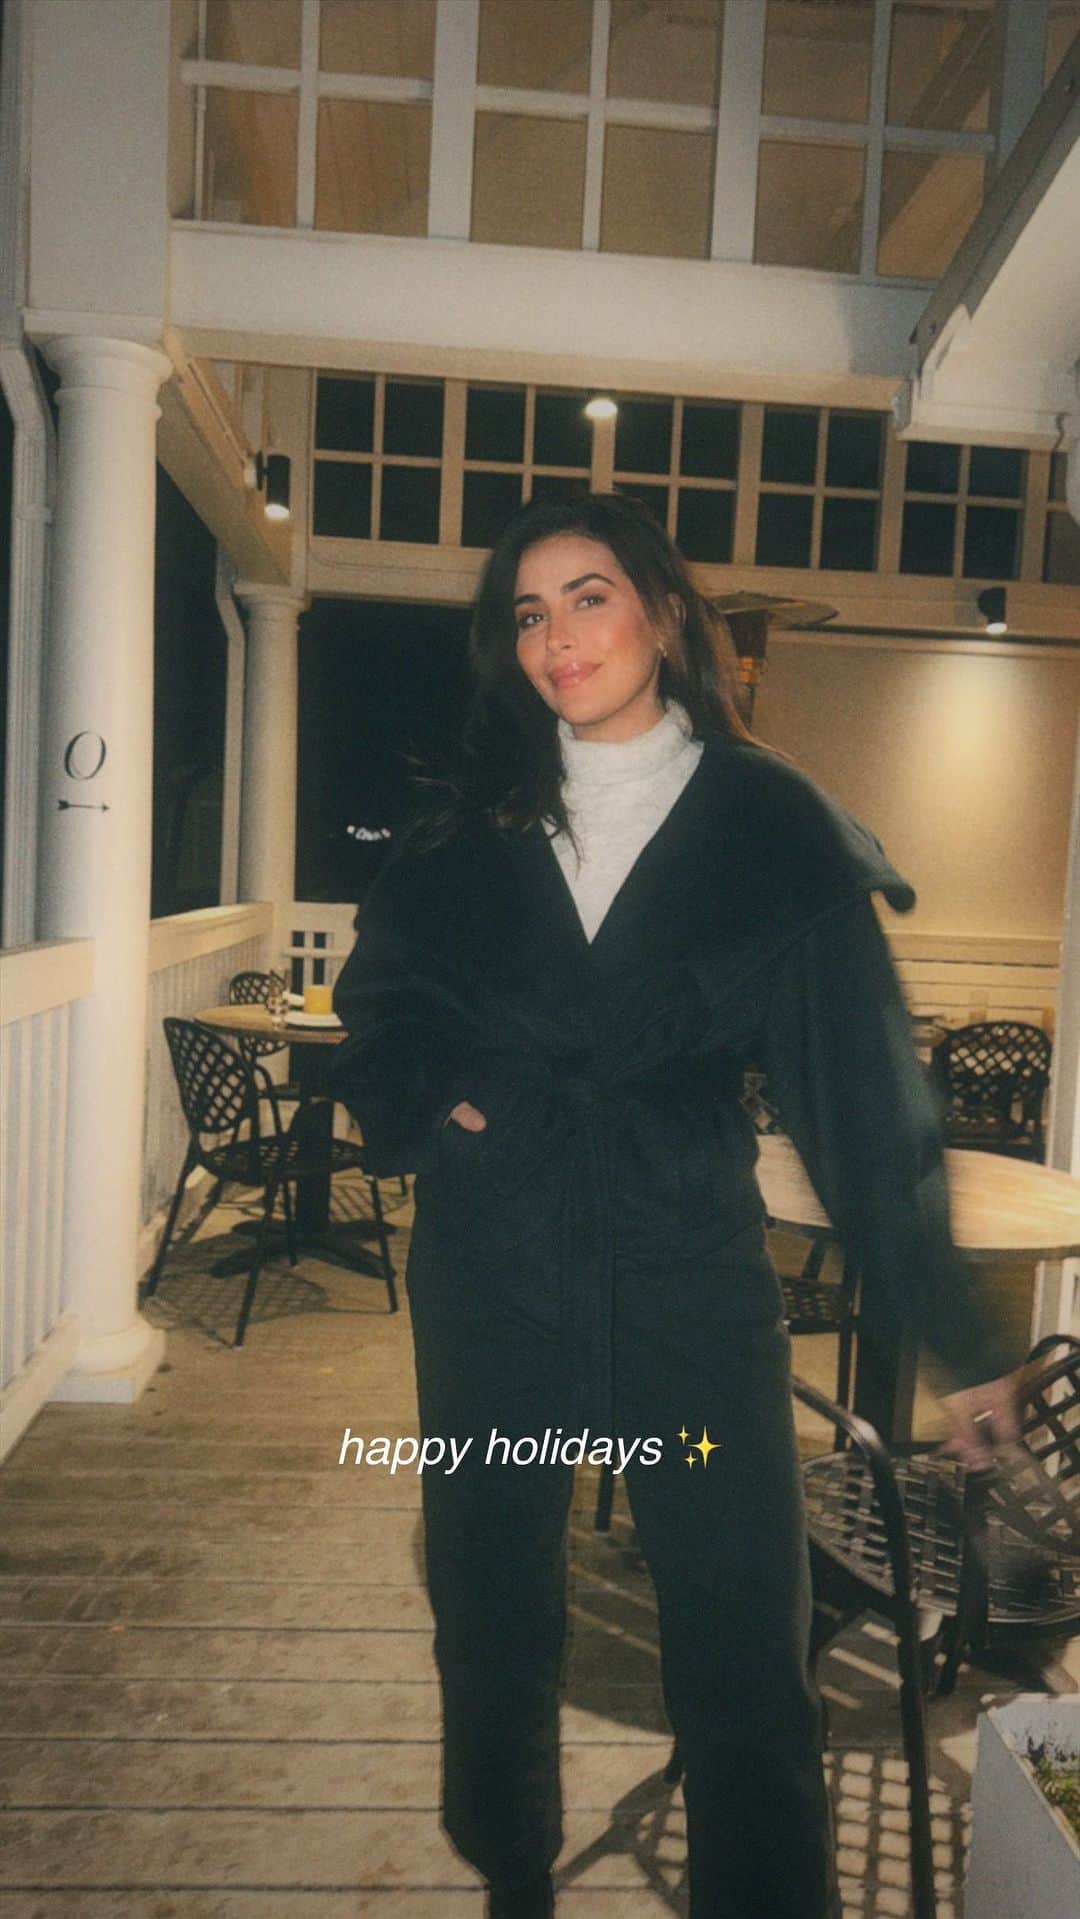 Sazan Hendrixのインスタグラム：「POV: The pocket of time between Thanksgiving and Christmas ✨🥰 Family time lately with the highlight being my sweet niece Pepper being in town from New Zealand! I am over here eating her + all the thingssss and enjoying Oliver boy getting to experience his first Christmas ♥️ For the remainder of 2023 my plans are soak up the slow mornings, work on my own time and have a quality circle of people around. Who’s with me!?! Sending alll my love & warm wishes to you as we soak up the small bit of time left in 2023! ✨🫶🏽 #happyholidays #familytime」